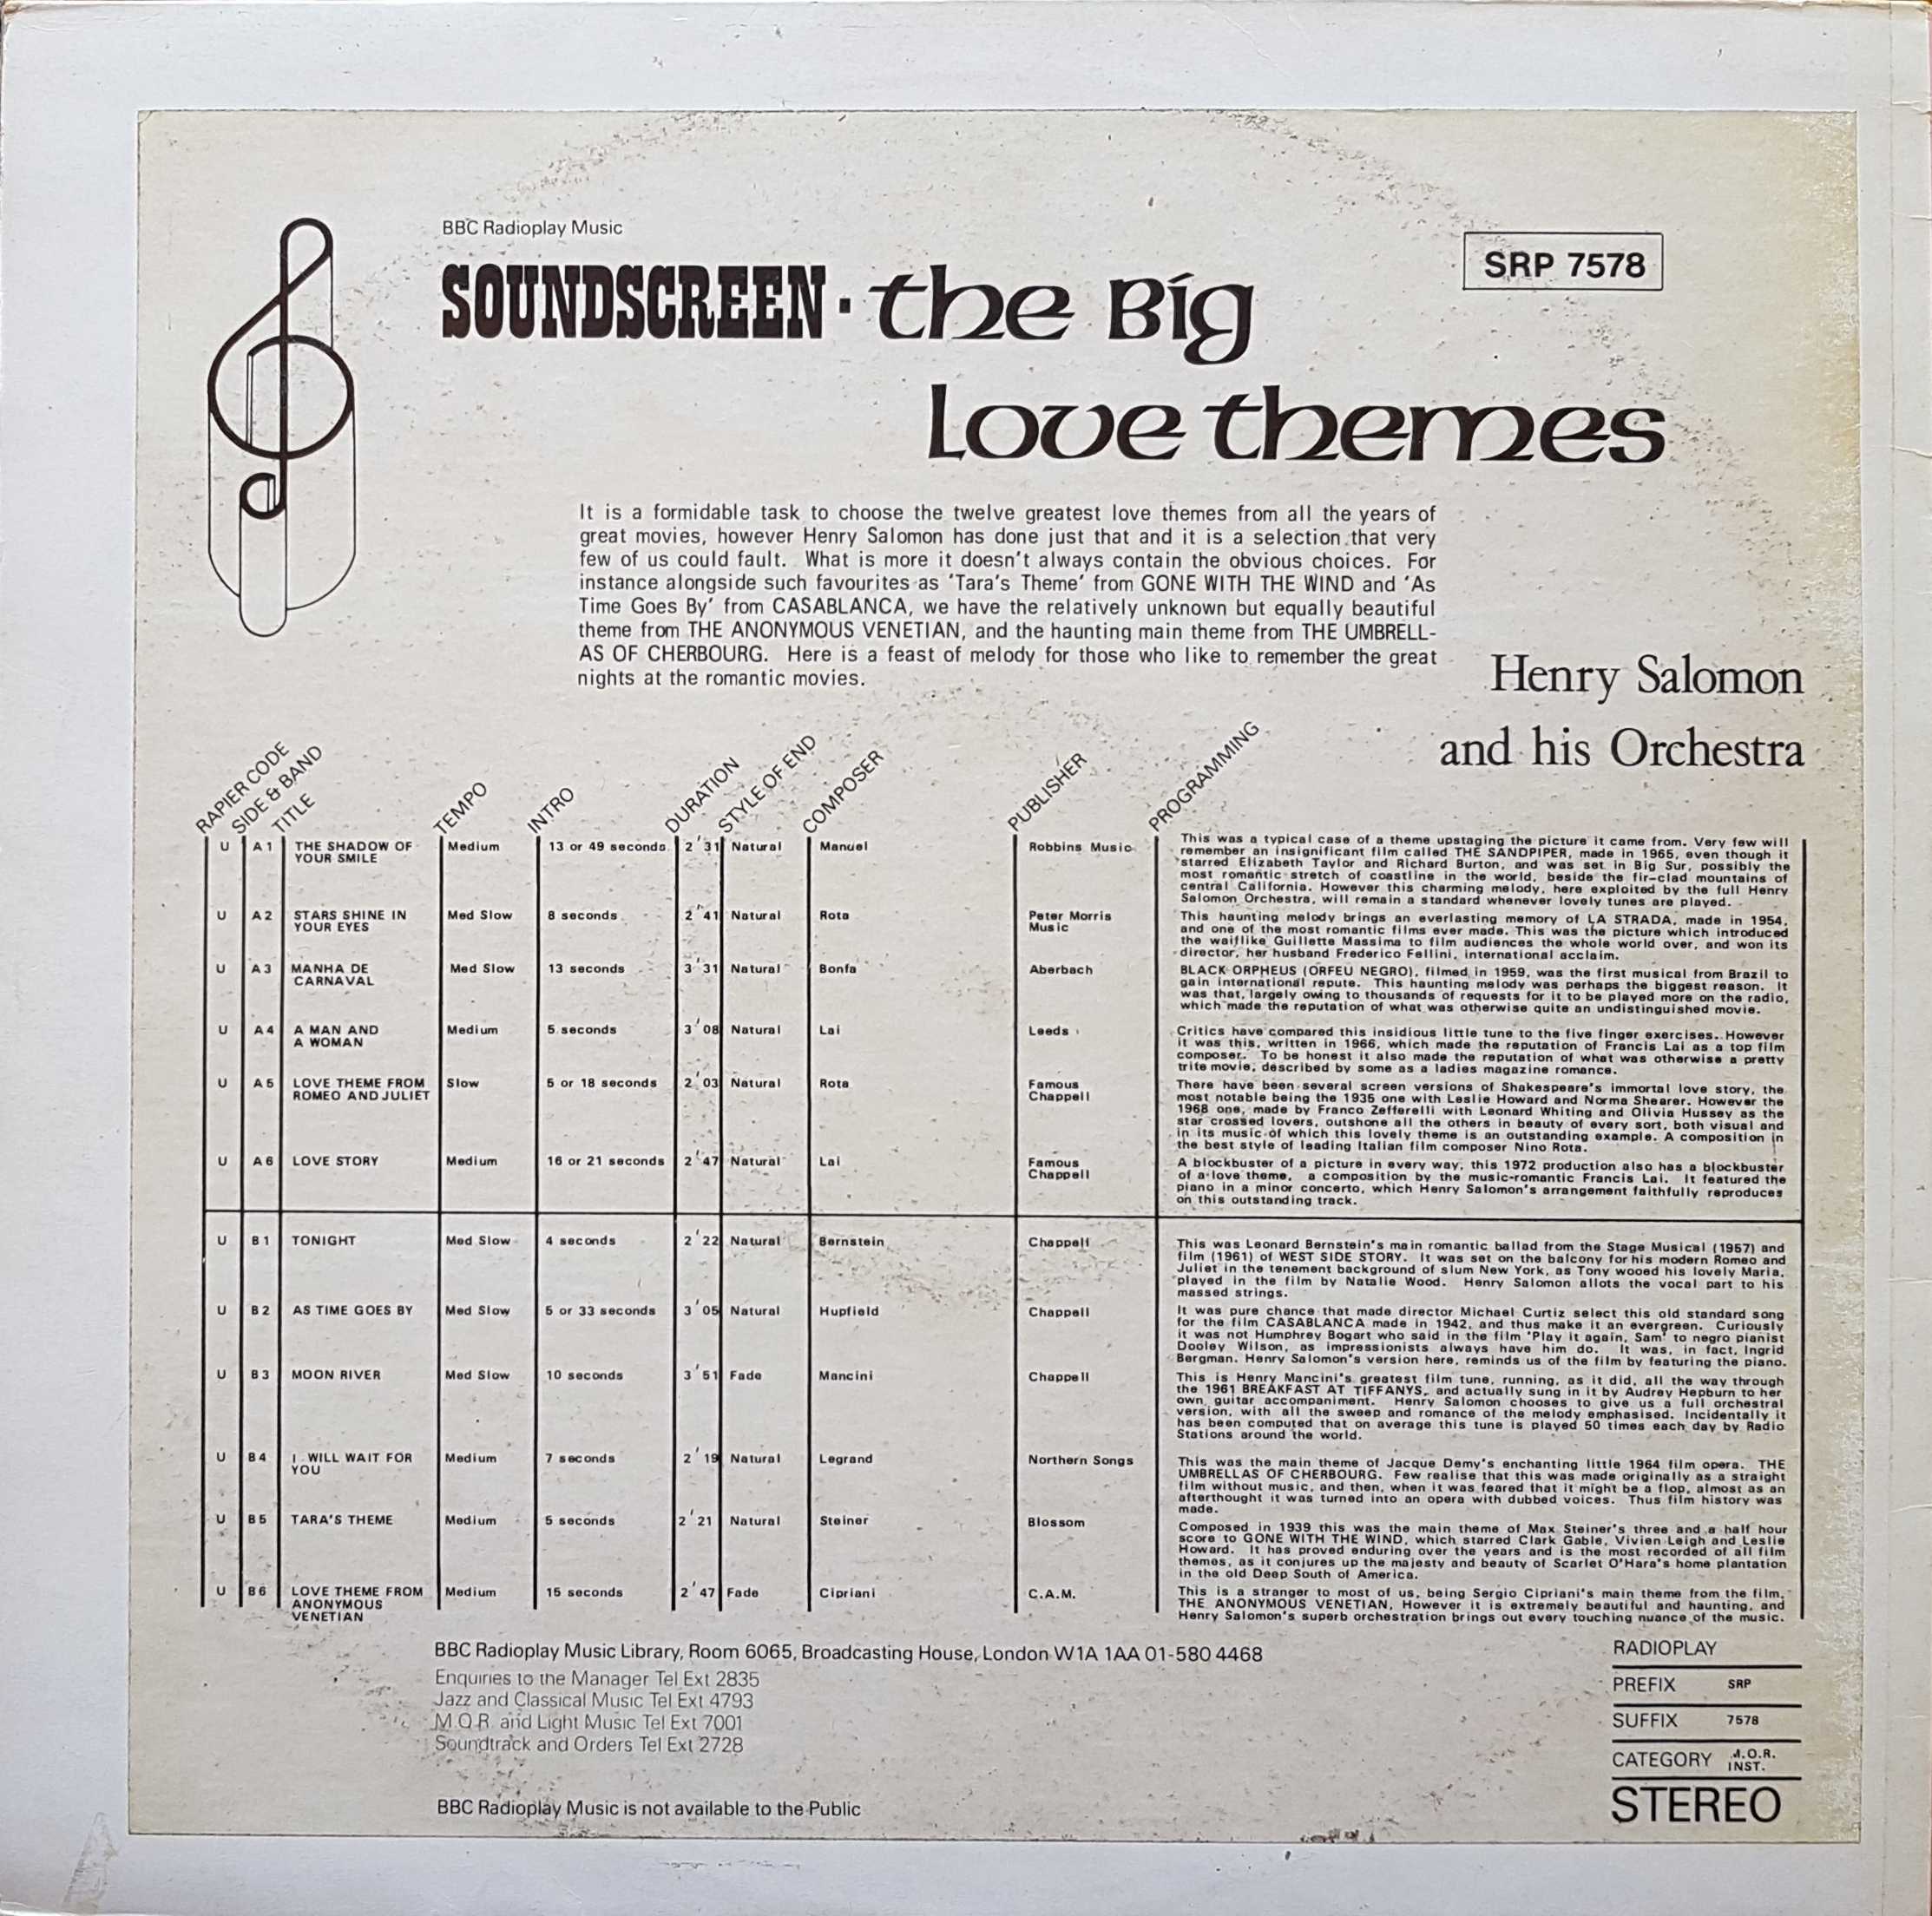 Picture of SRP 7578 The big love themes by artist Henry Salmon from the BBC records and Tapes library